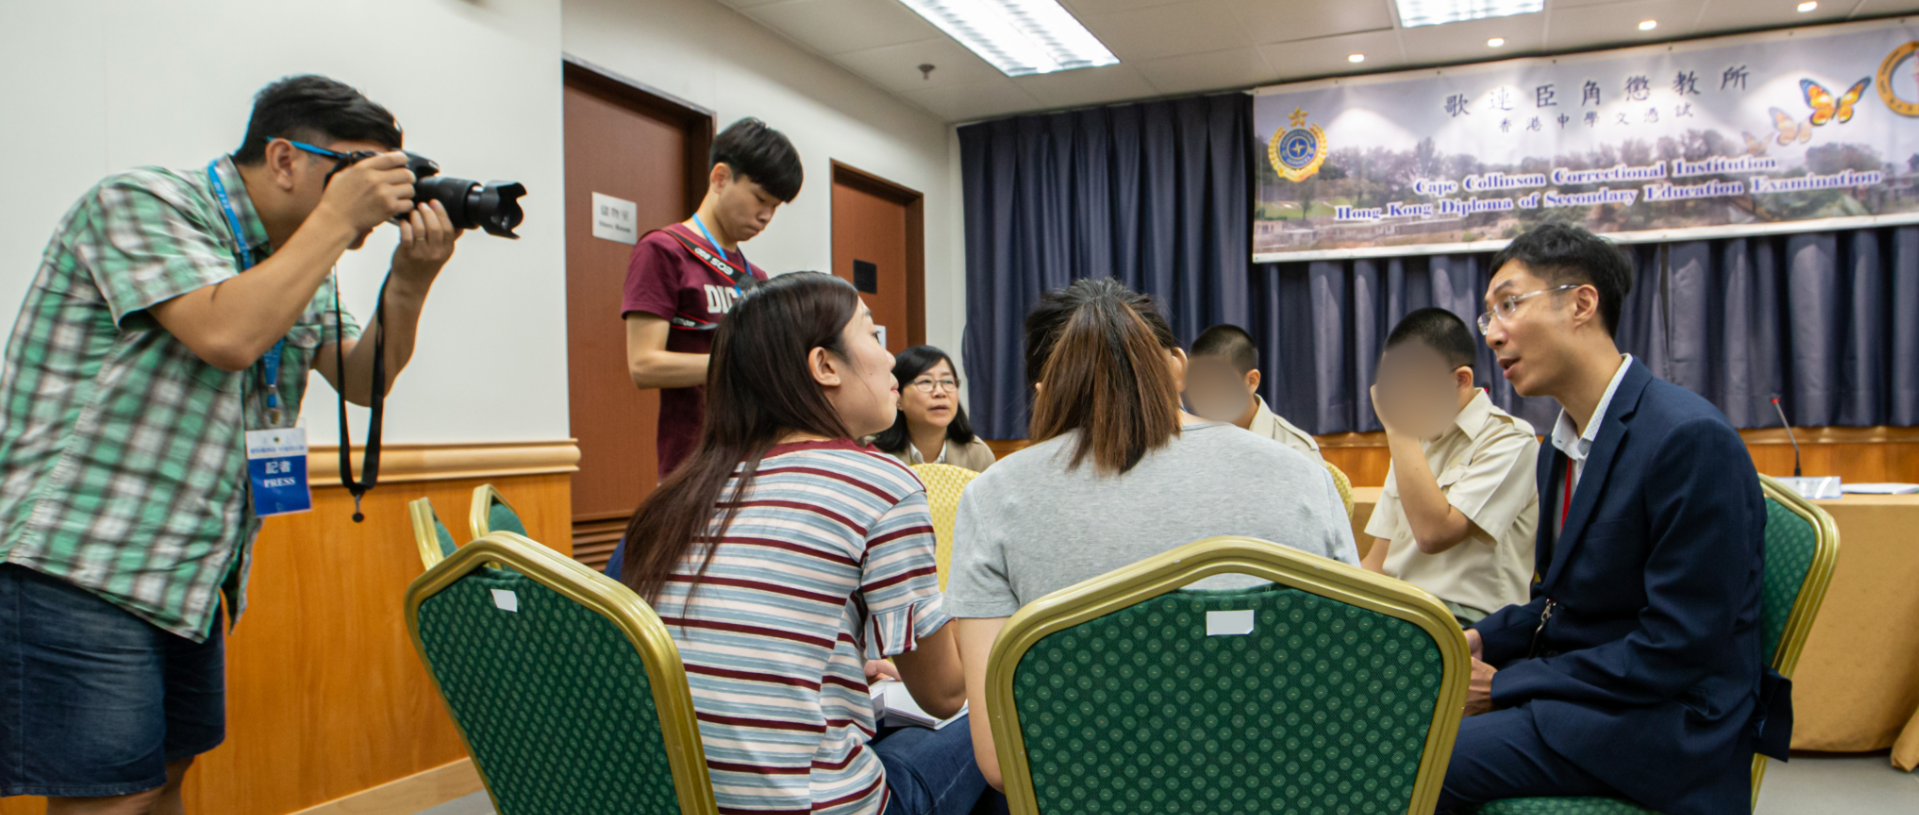 The media interview young persons in custody who have attended Hong Kong Diploma of Secondary Education Examination and their teacher.